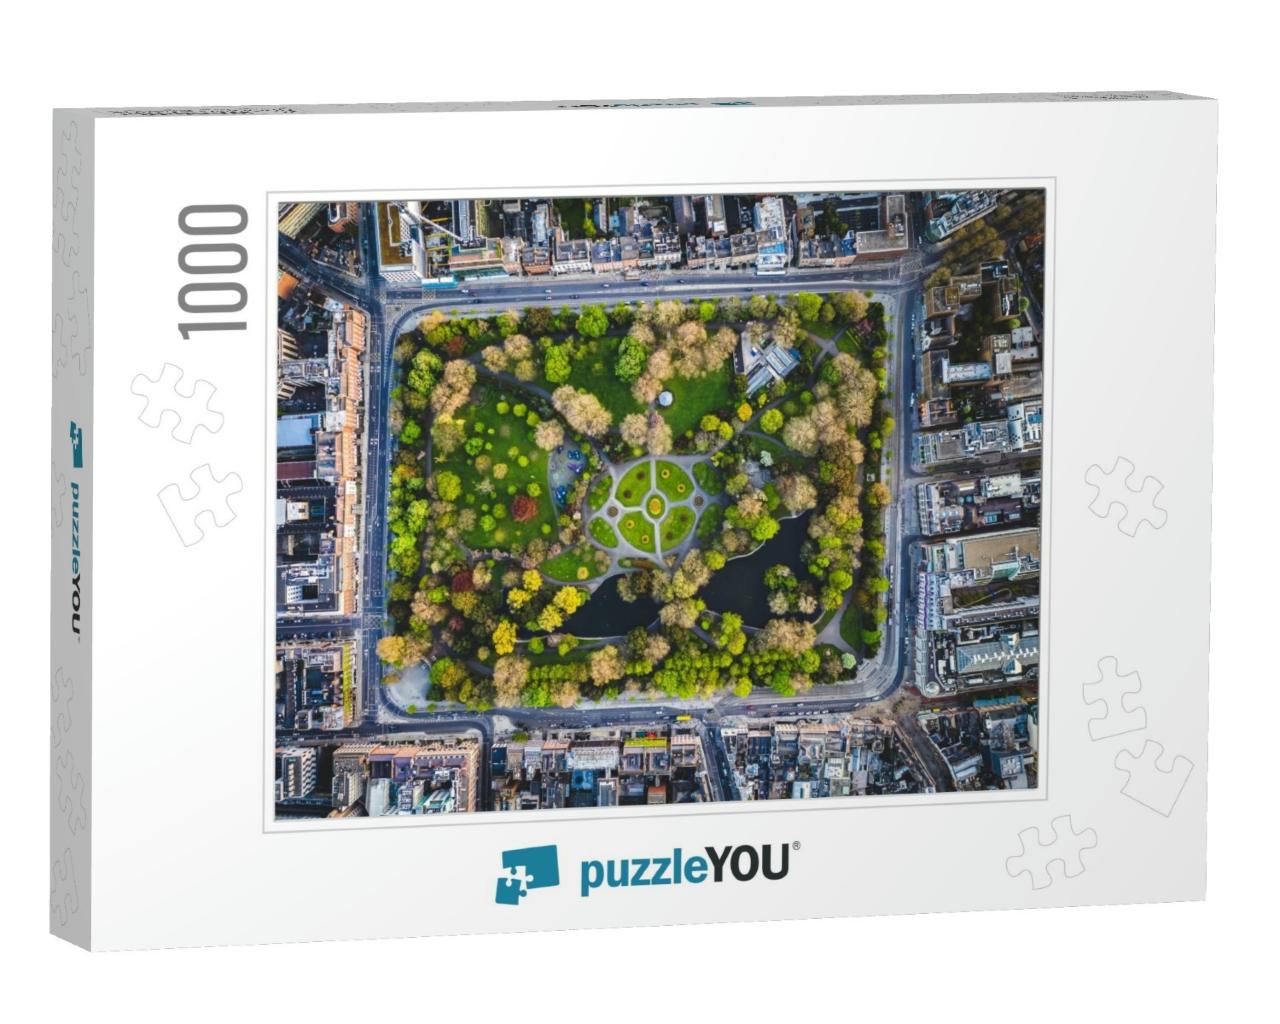 St. Stephens Green Park in Dublin View from the Air... Jigsaw Puzzle with 1000 pieces